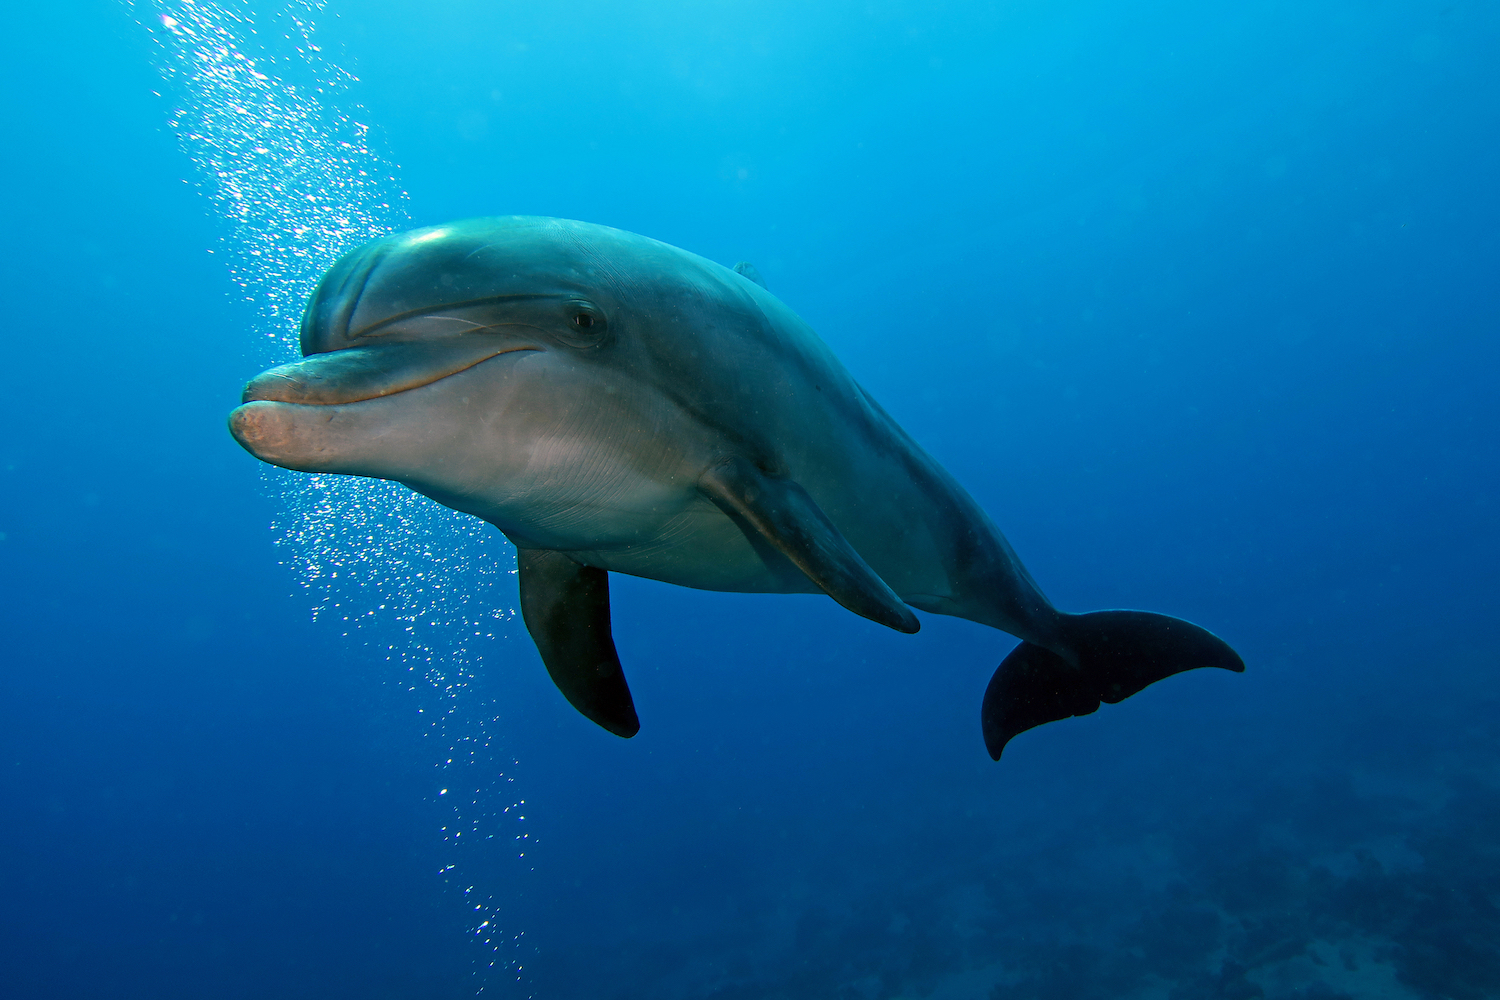 A bottlenose dolphin approaching the camera underwater, and a common sighting while diving on The Third Reef